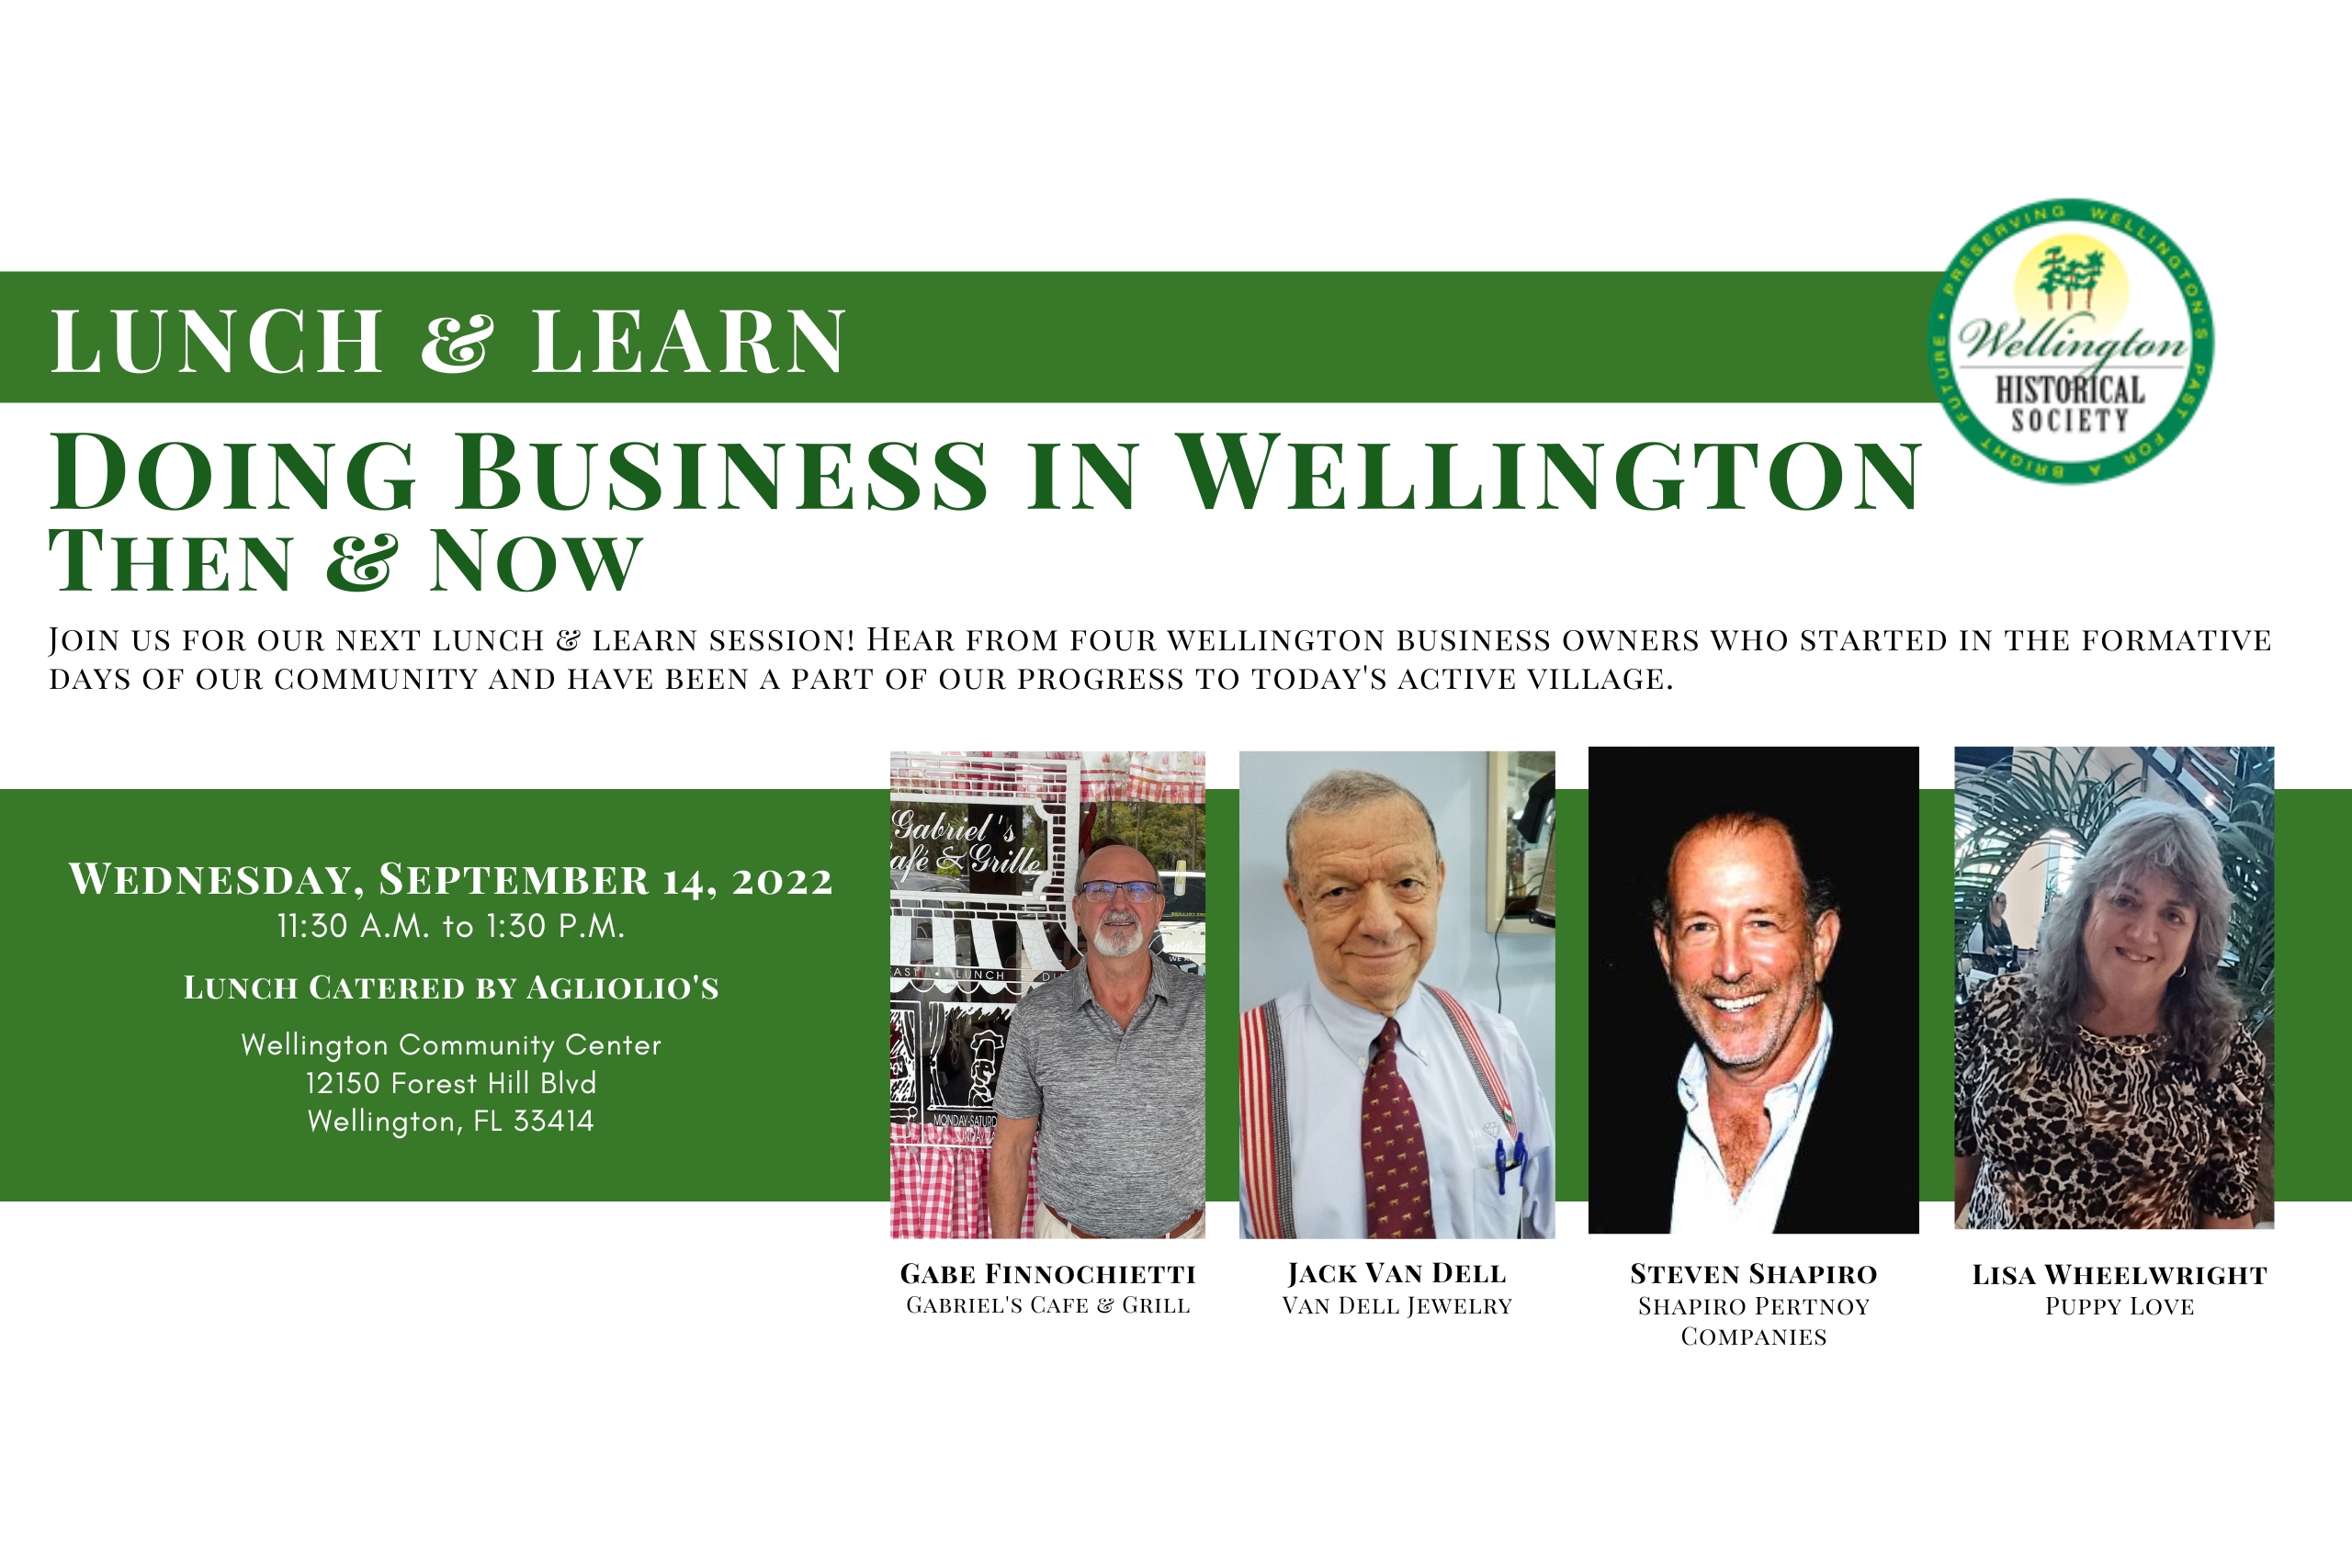 Lunch & Learn: Doing Business in Wellington Then & Now